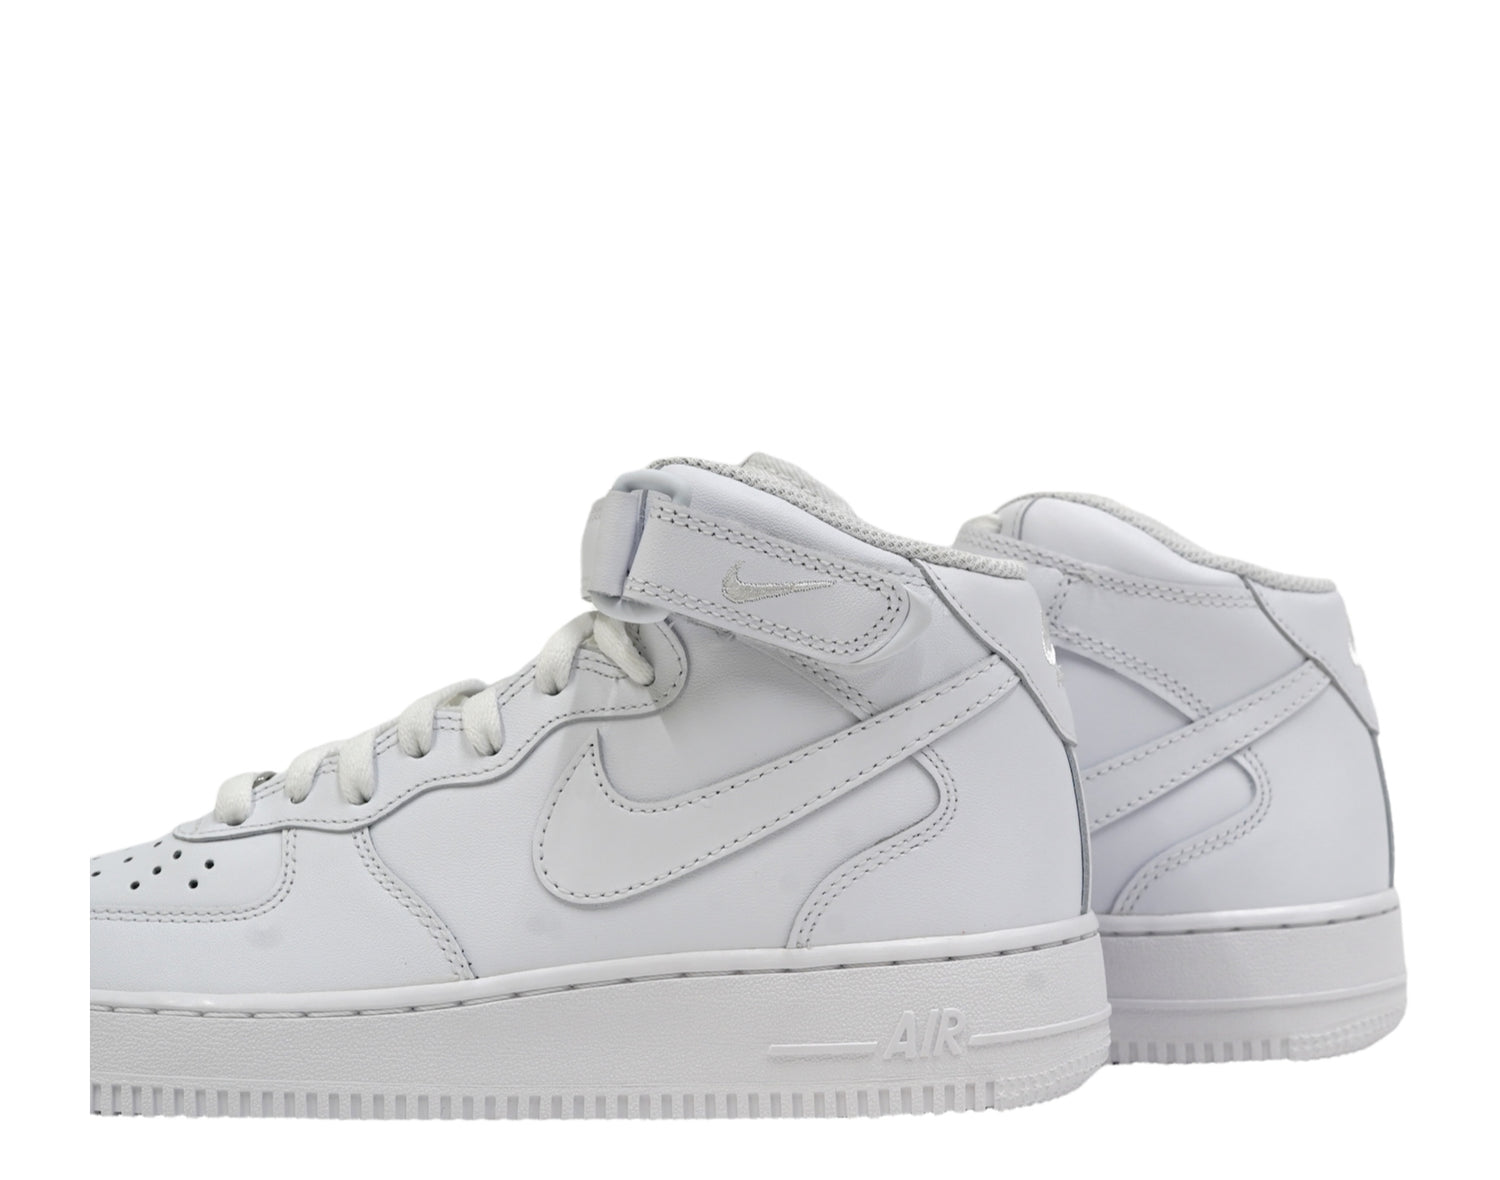 Nike Air Force 1 Mid '07 Men's Basketball Shoes